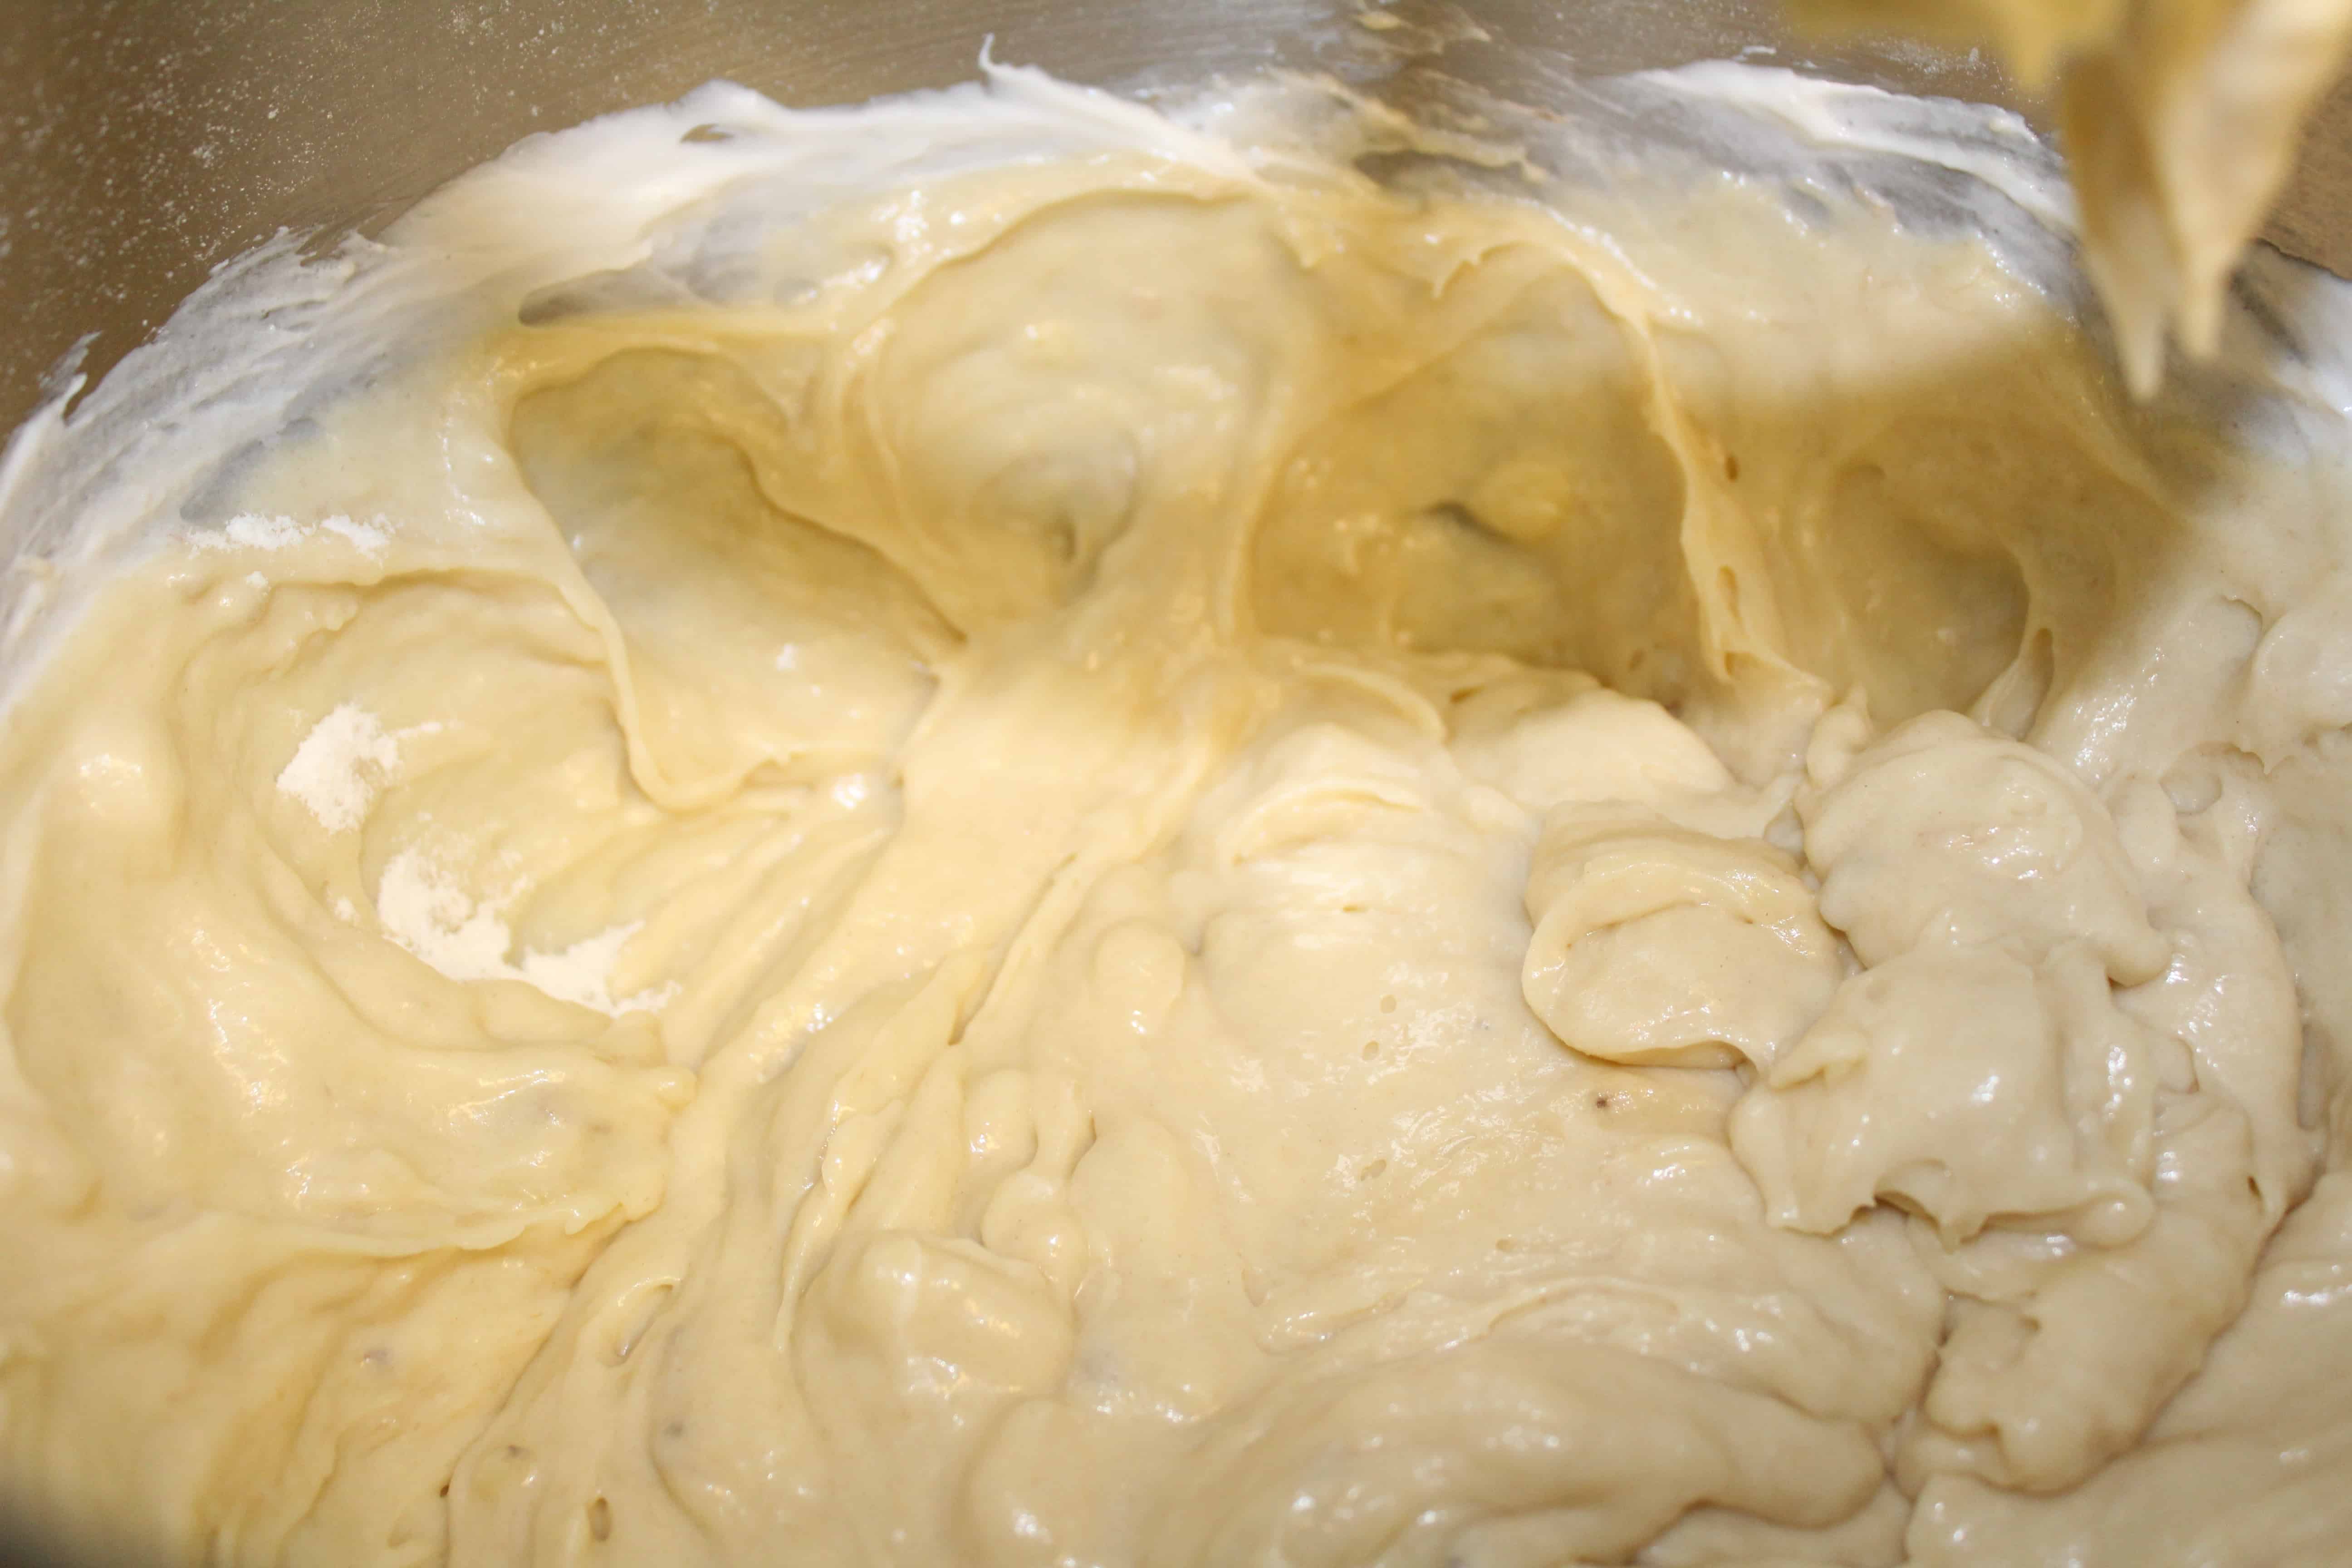 Sour cream and banana added to dough to create a creamier texture.